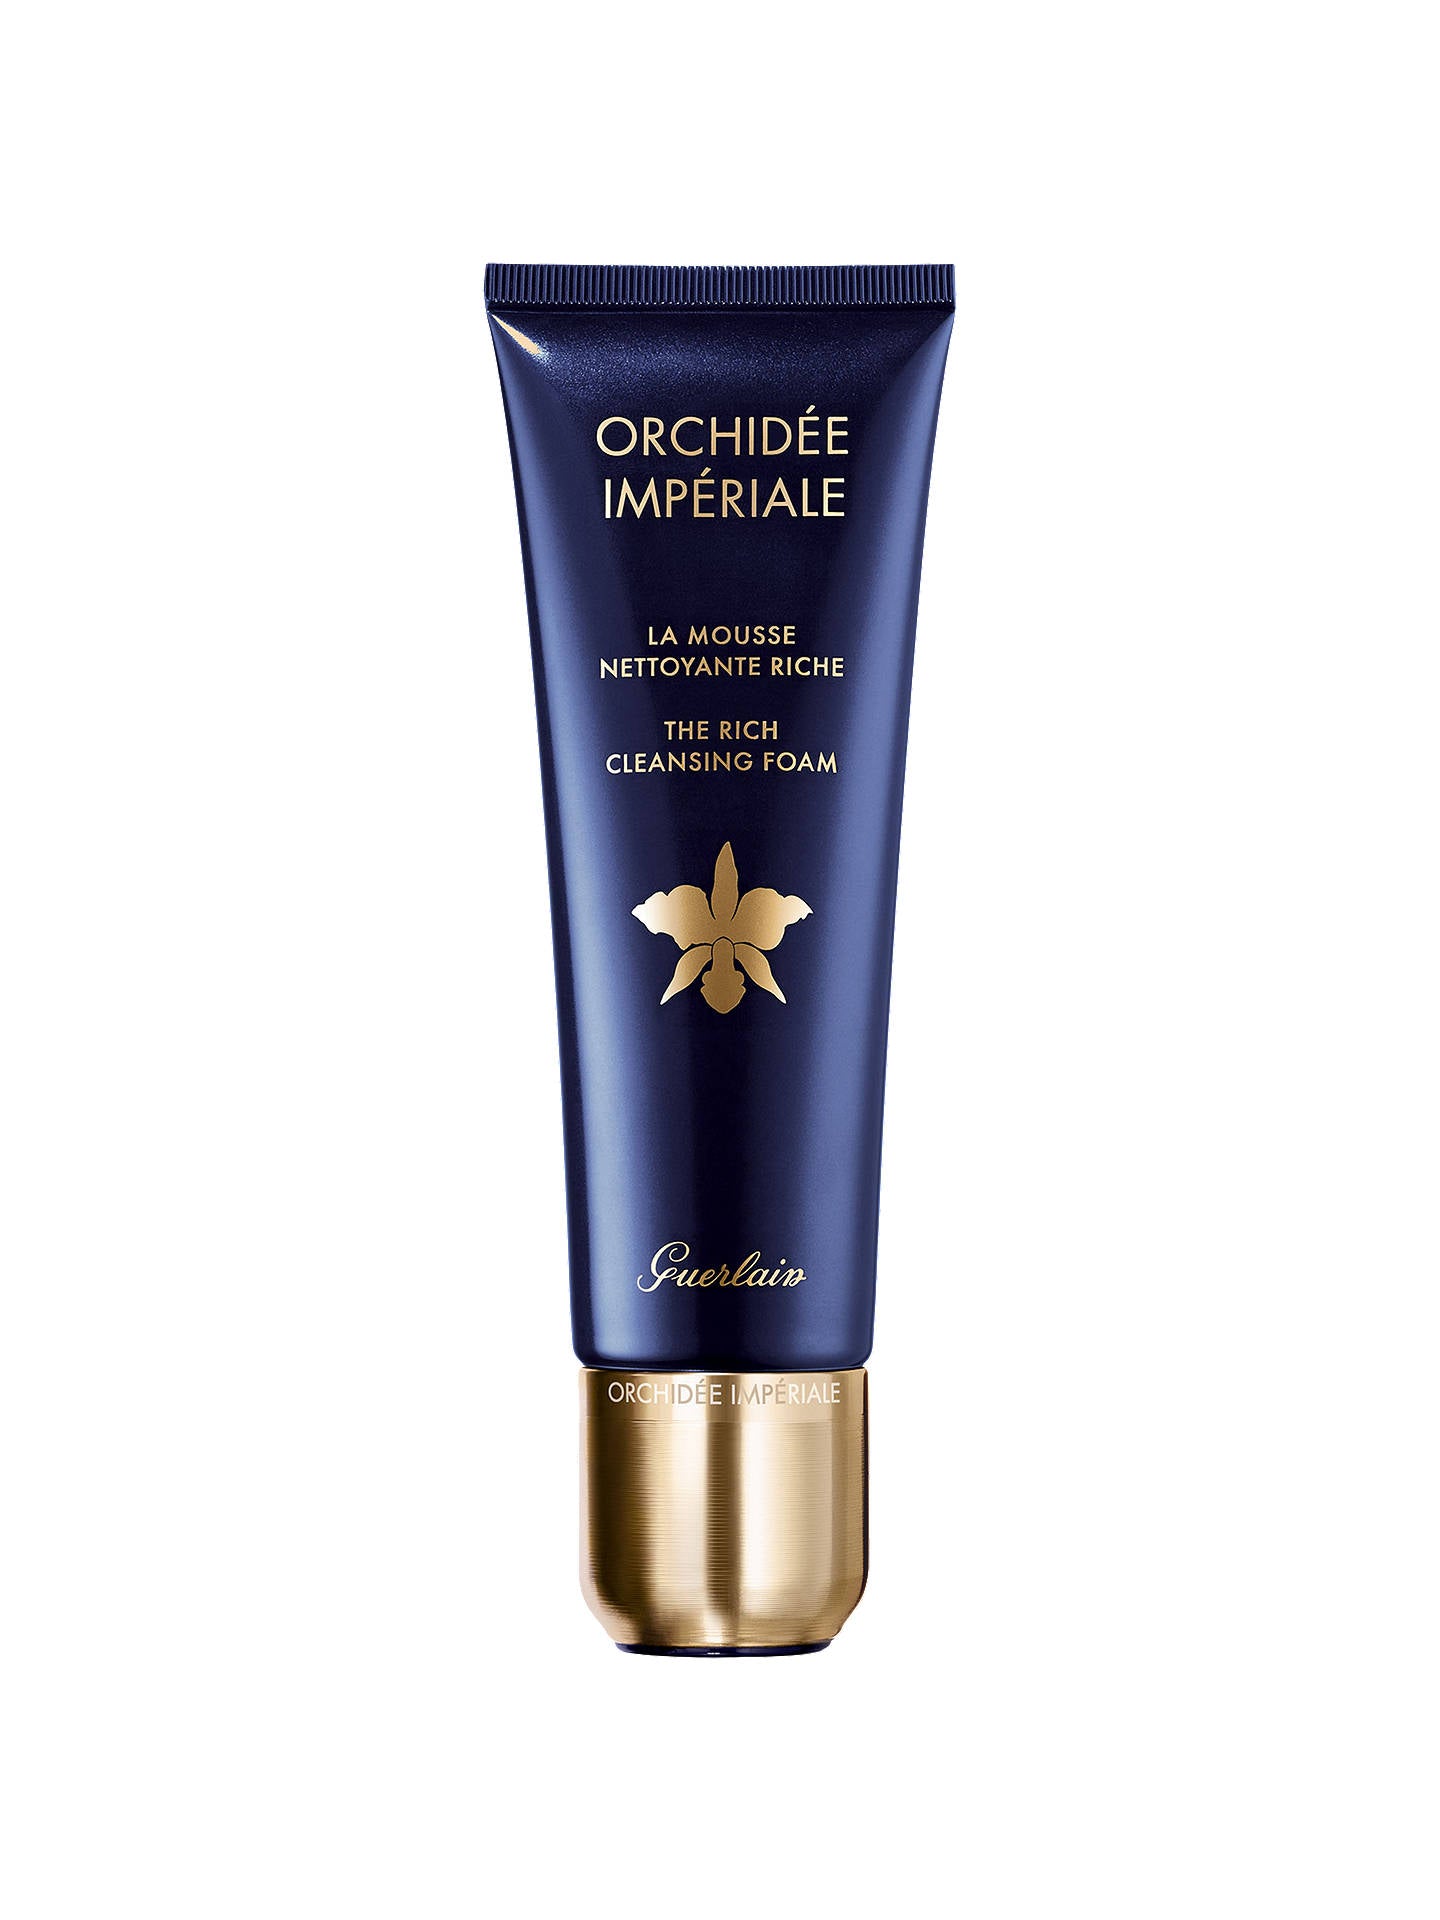 Guerlain Orchidee Imperiale The Rich Cleansing Foam (125ml)